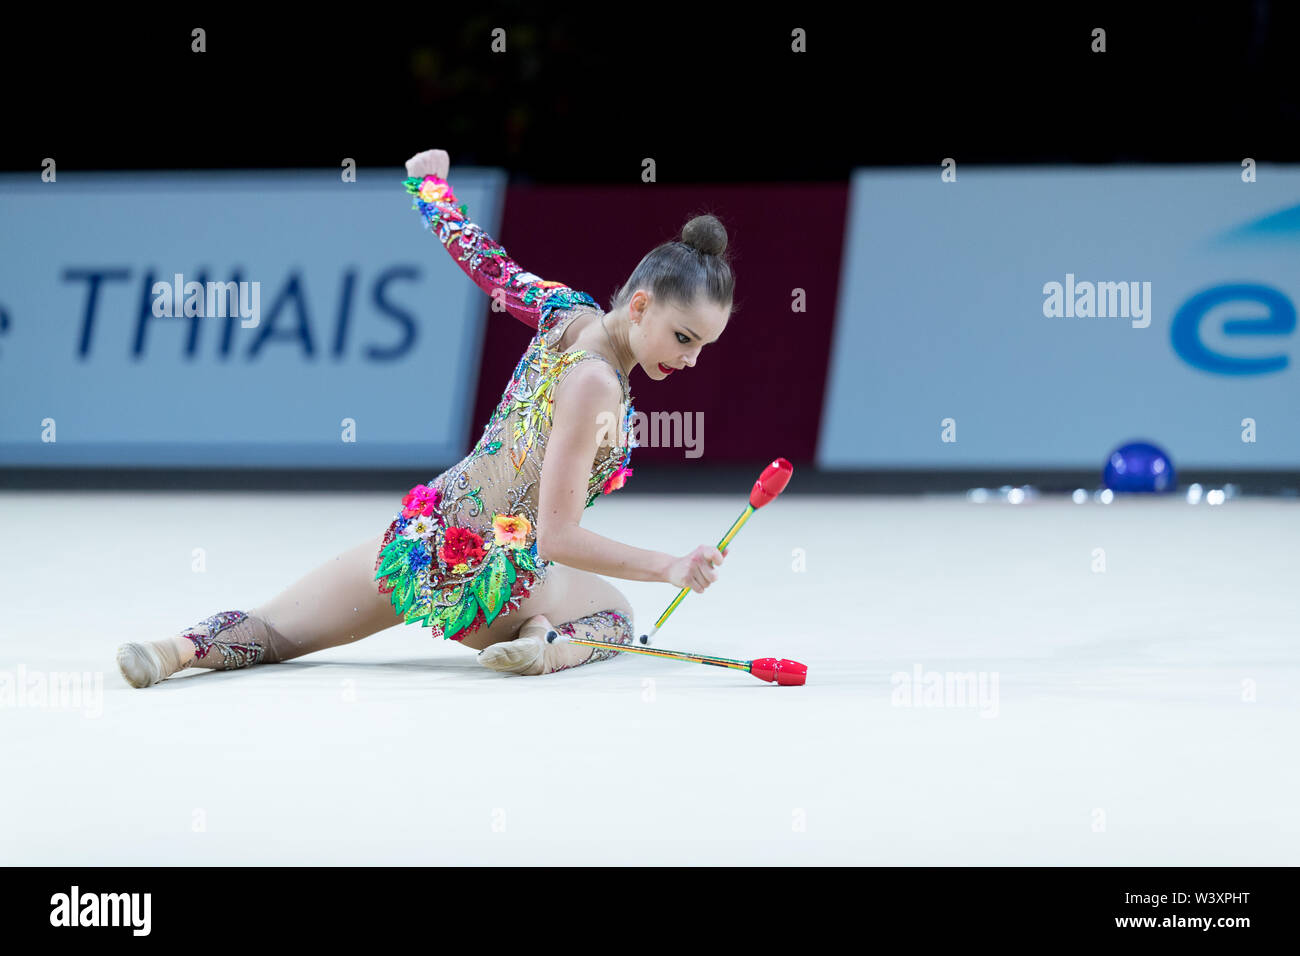 Arina Averina from Russia performs her clubs routine during 2019 Grand Prix de Thiais Stock Photo